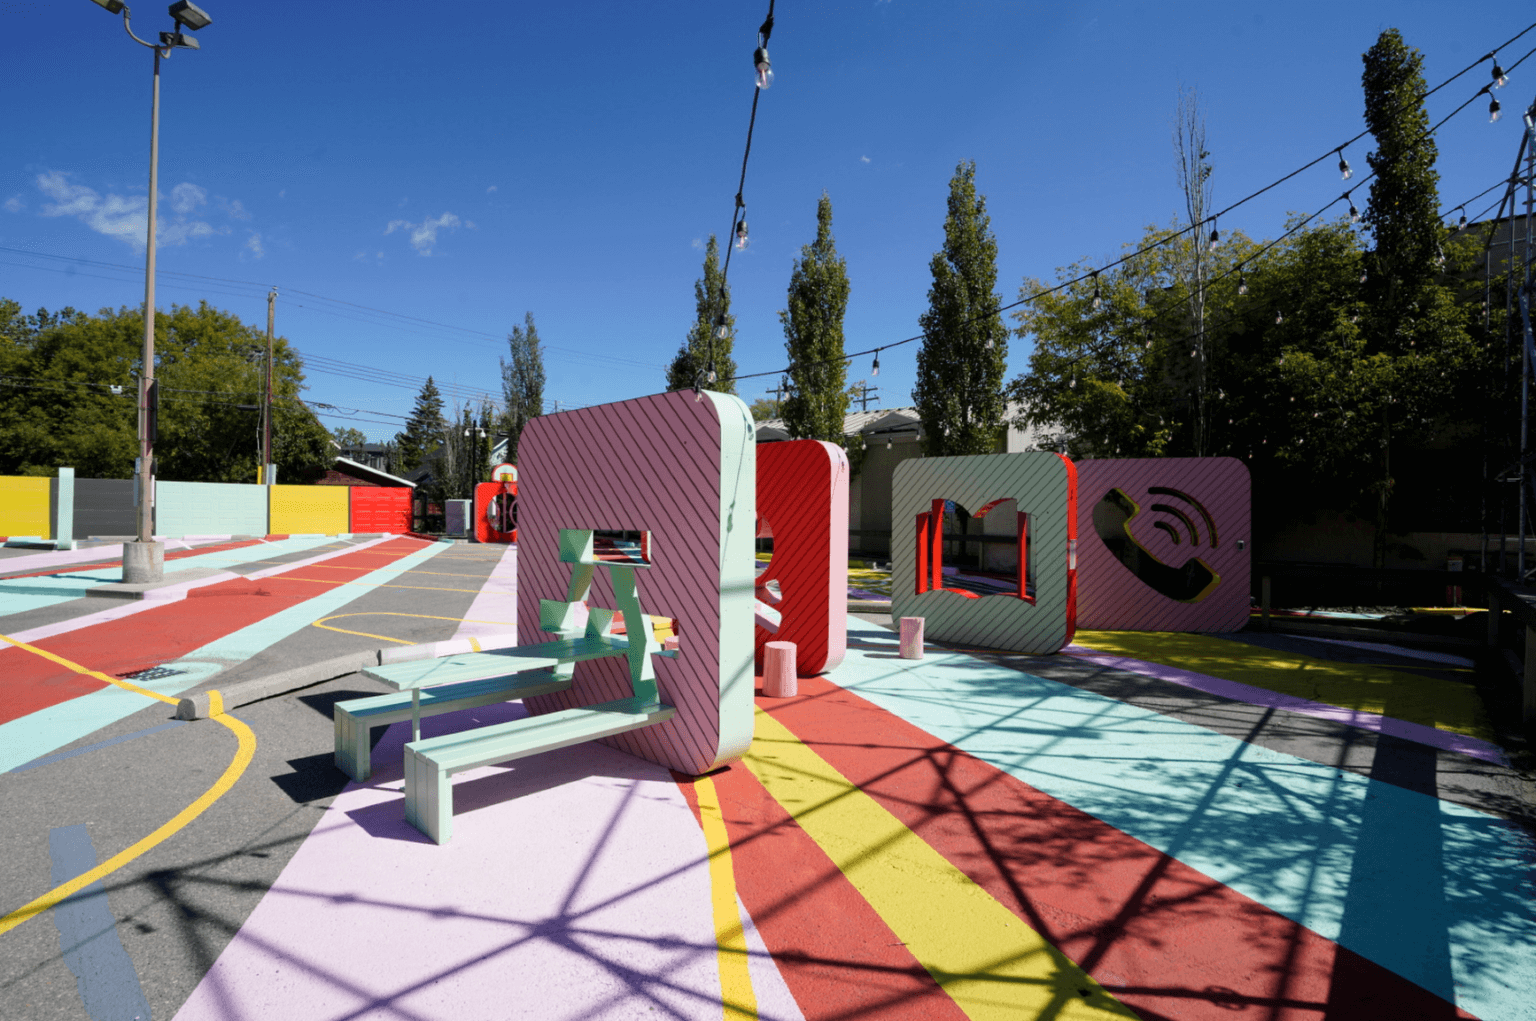 Parking lot with colourful seating and statues